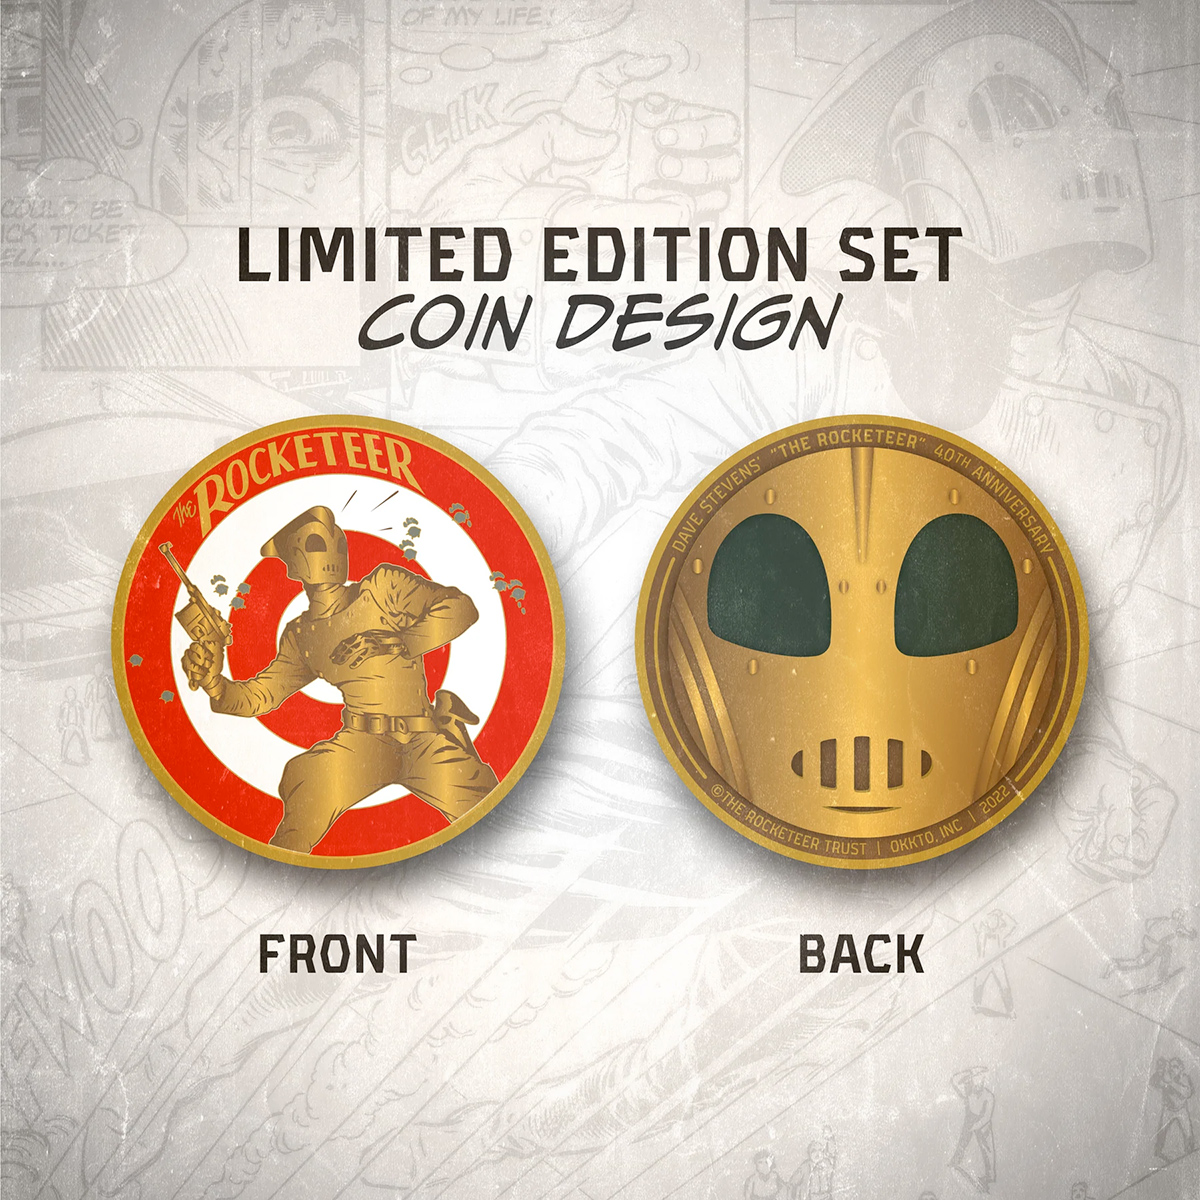 The Rocketeer Watch (Limited Edition Set)